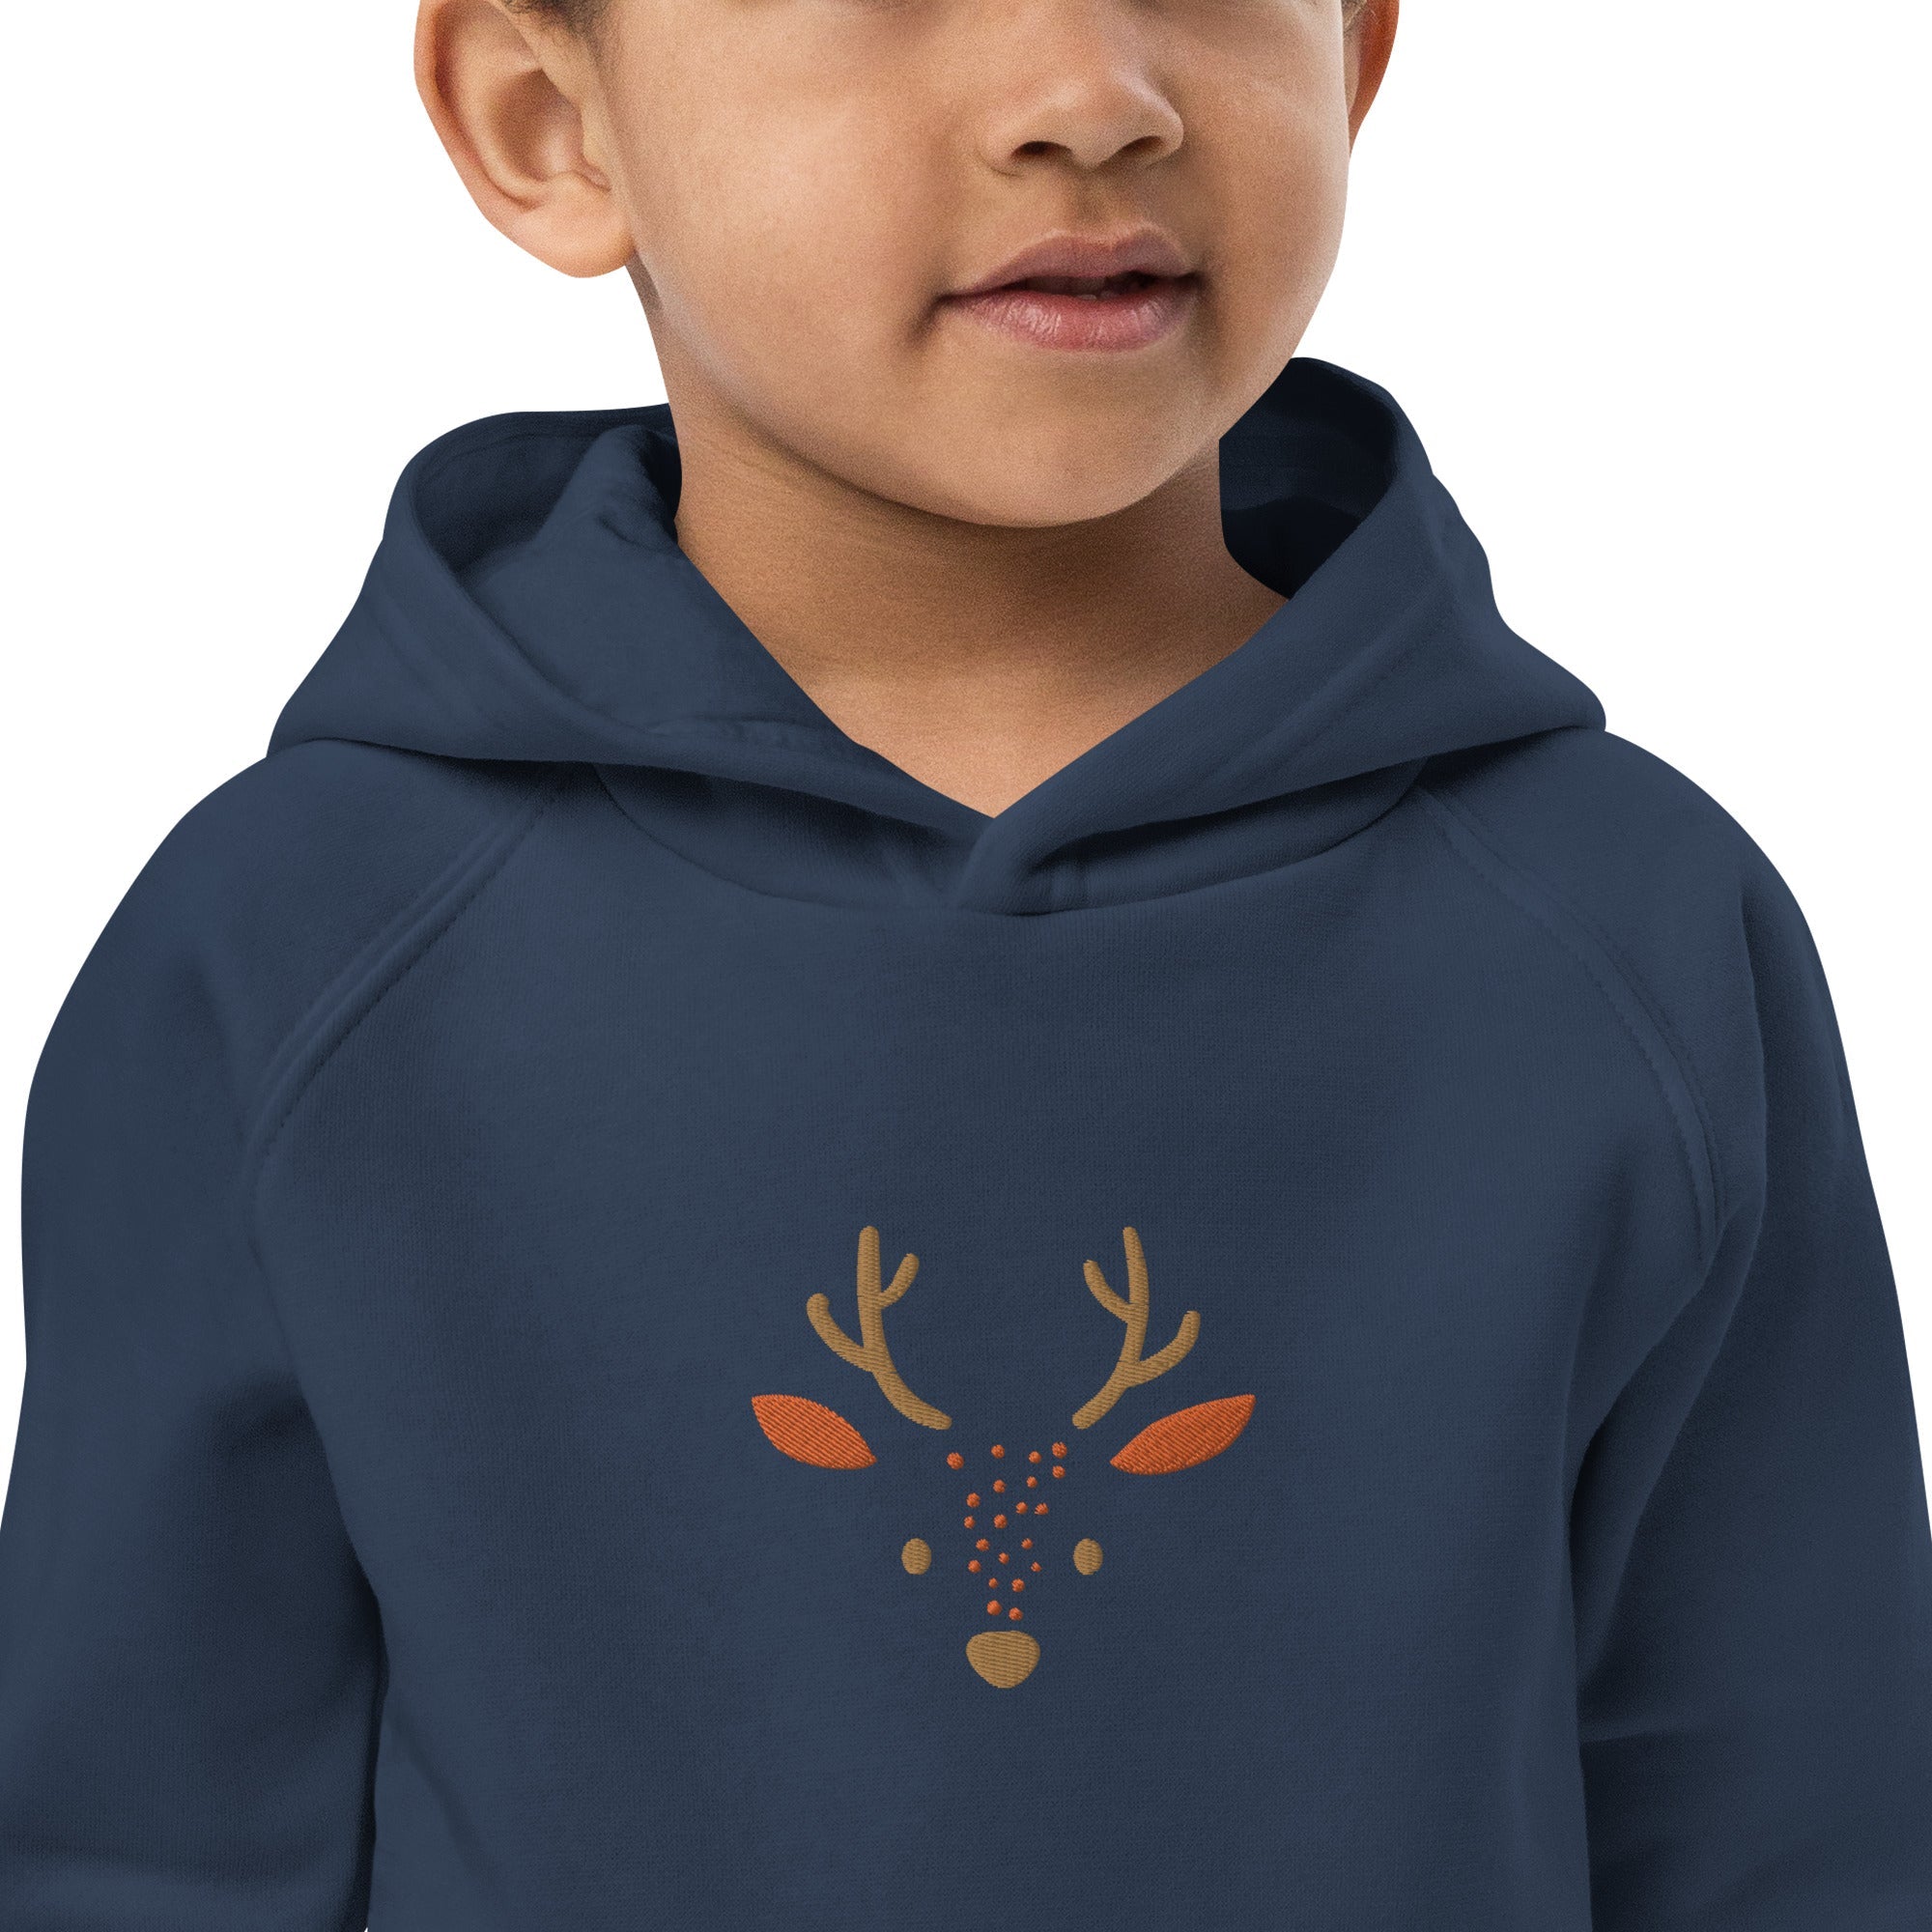 Deer 2 Kids Eco Hoodie with cute animals, Organic Cotton pullover for children, gift idea for kids, soft hoodie for kids for Christmas-1